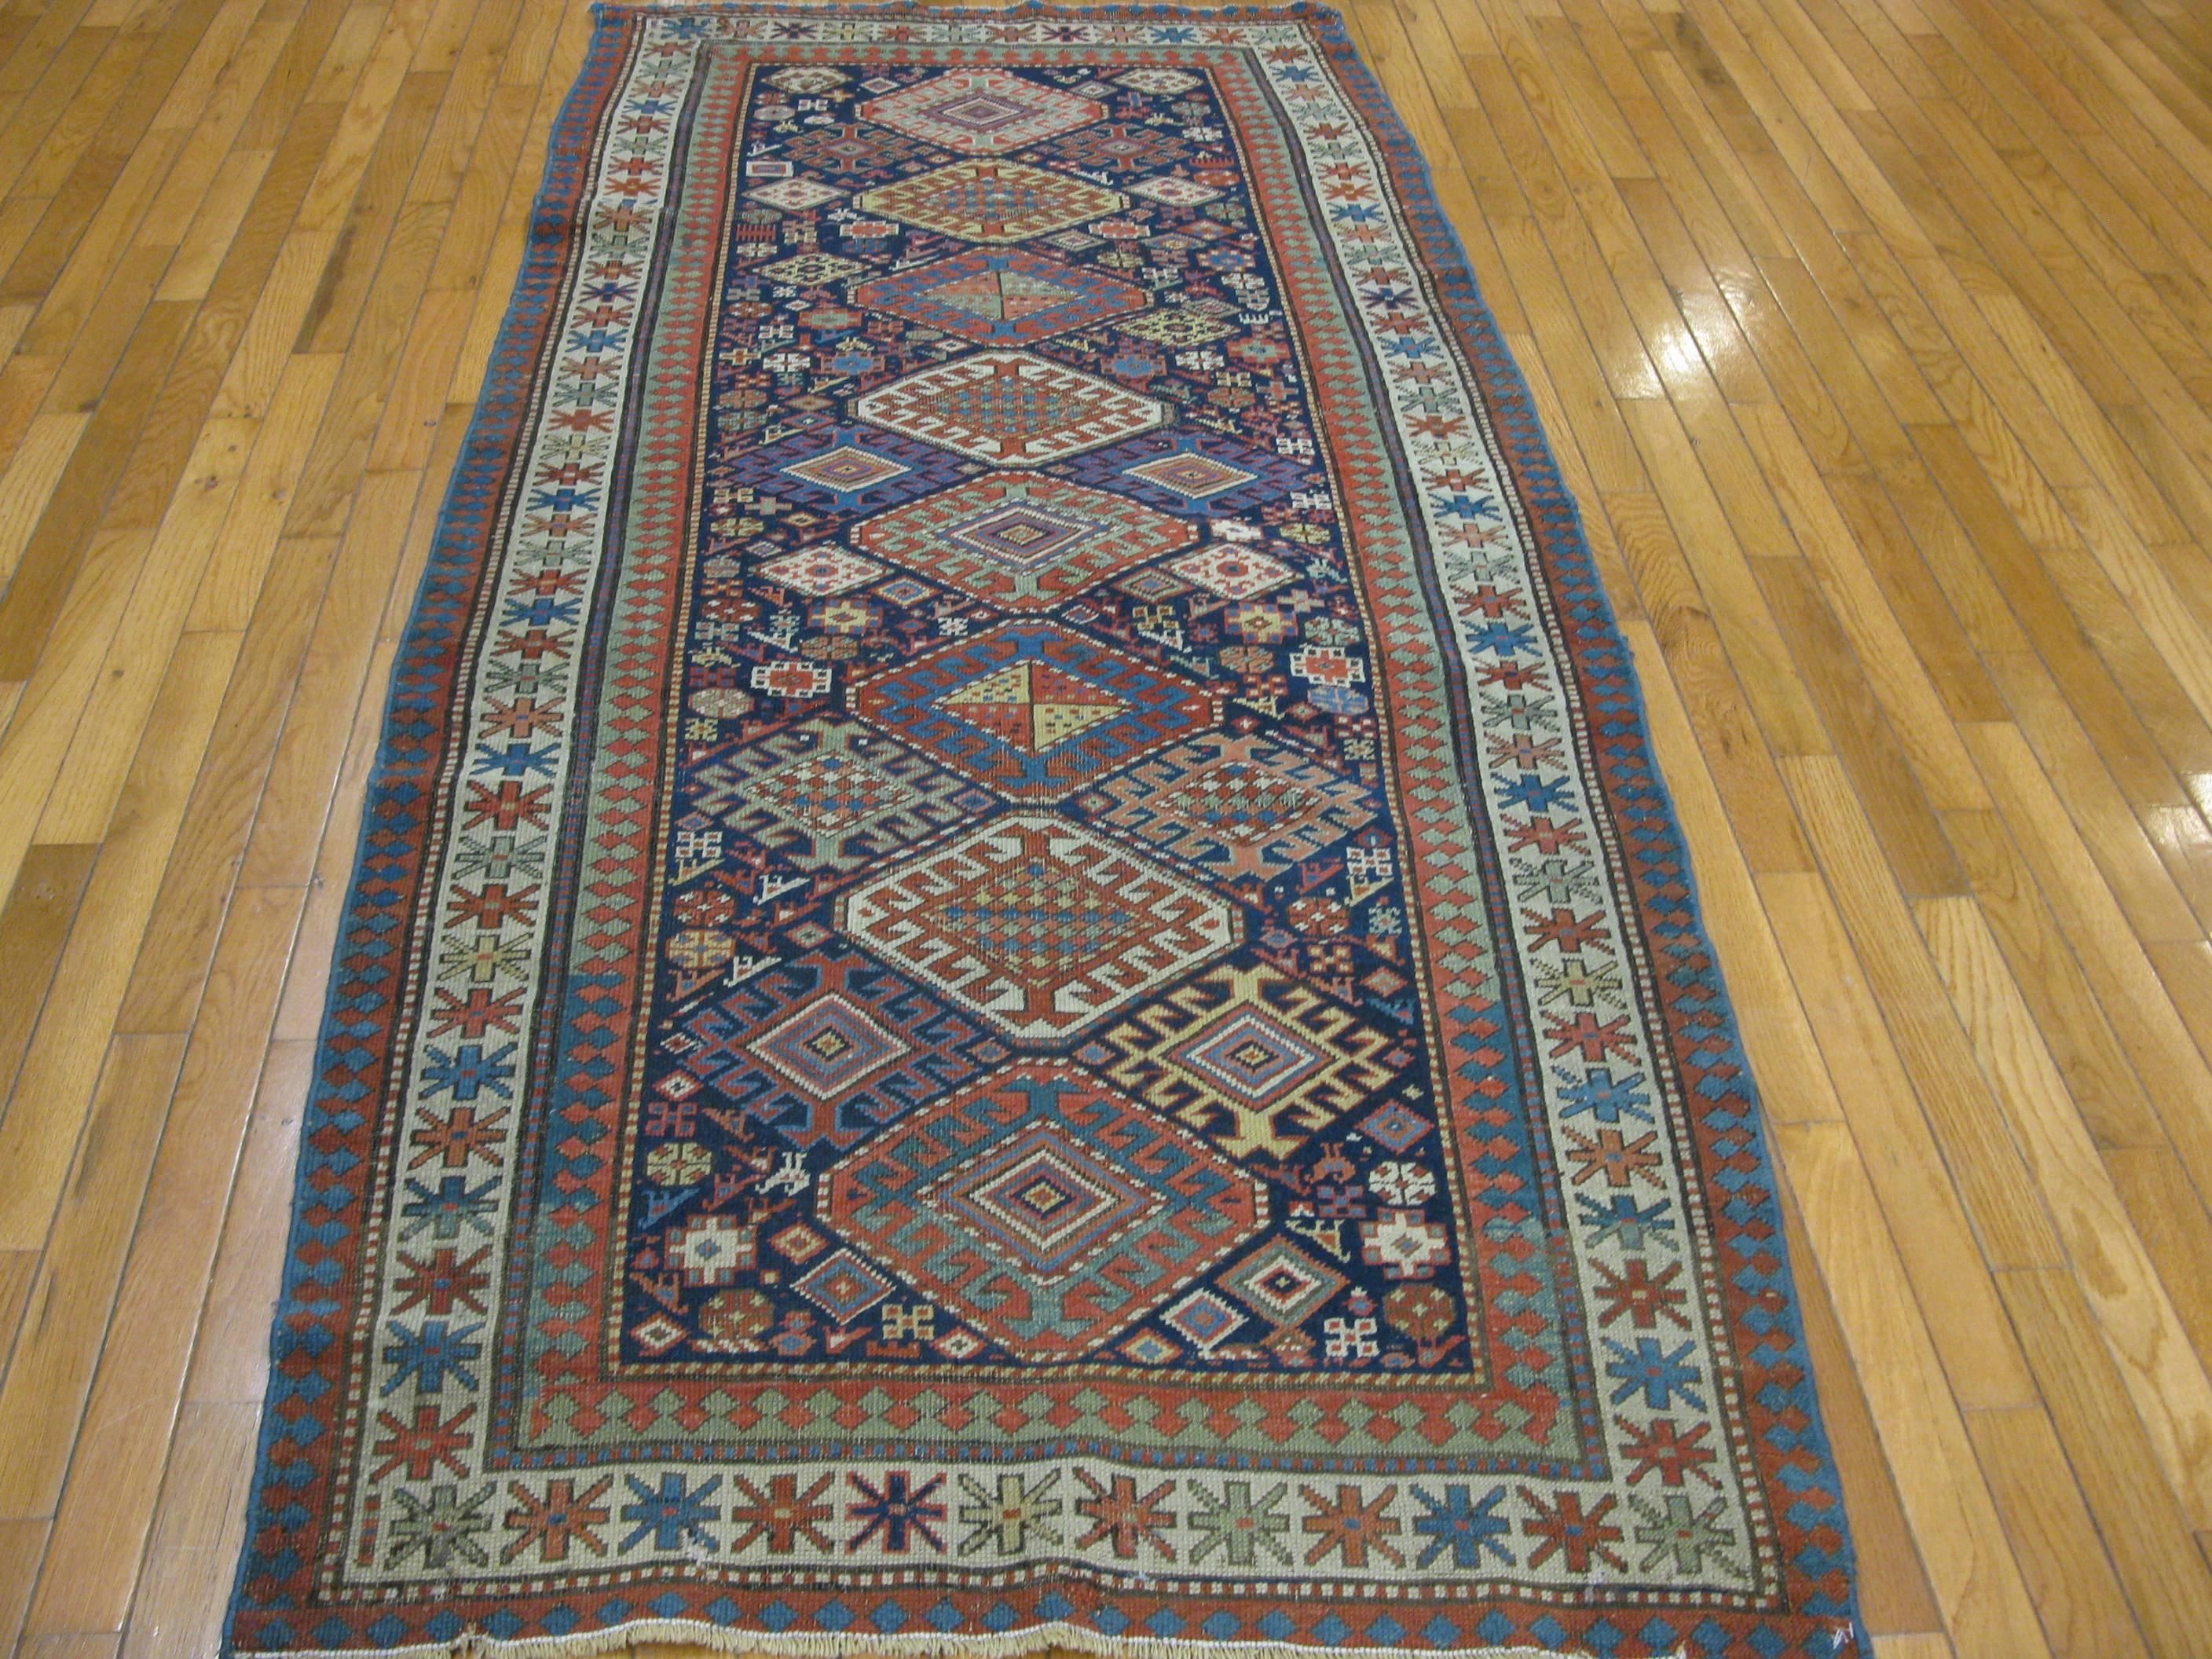 This is a beautiful antique hand-knotted late 19th century Caucasian Shirvan rug. It measures 3' 5'' x 7' 6'' and it's made of wool and all natural dyes.